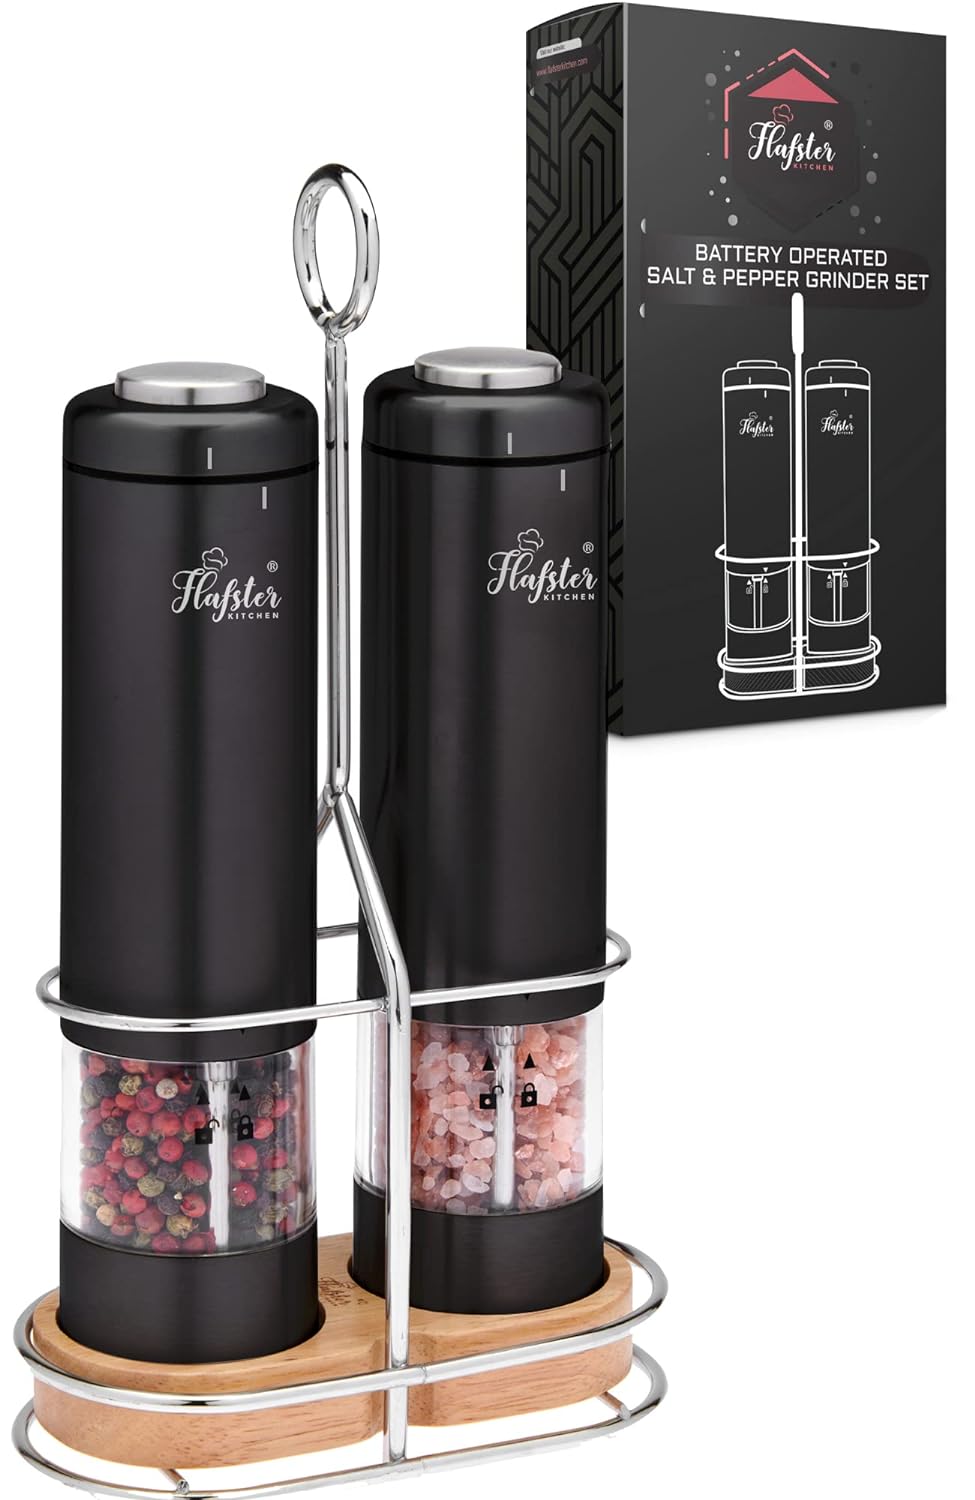 Electric Salt and Pepper Grinder Set -Mate Black Battery Operated Stainless Steel Salt&Pepper Mills(2) by Flafster Kitchen -Tall Power Shakers with Stand - Ceramic Grinders with lights